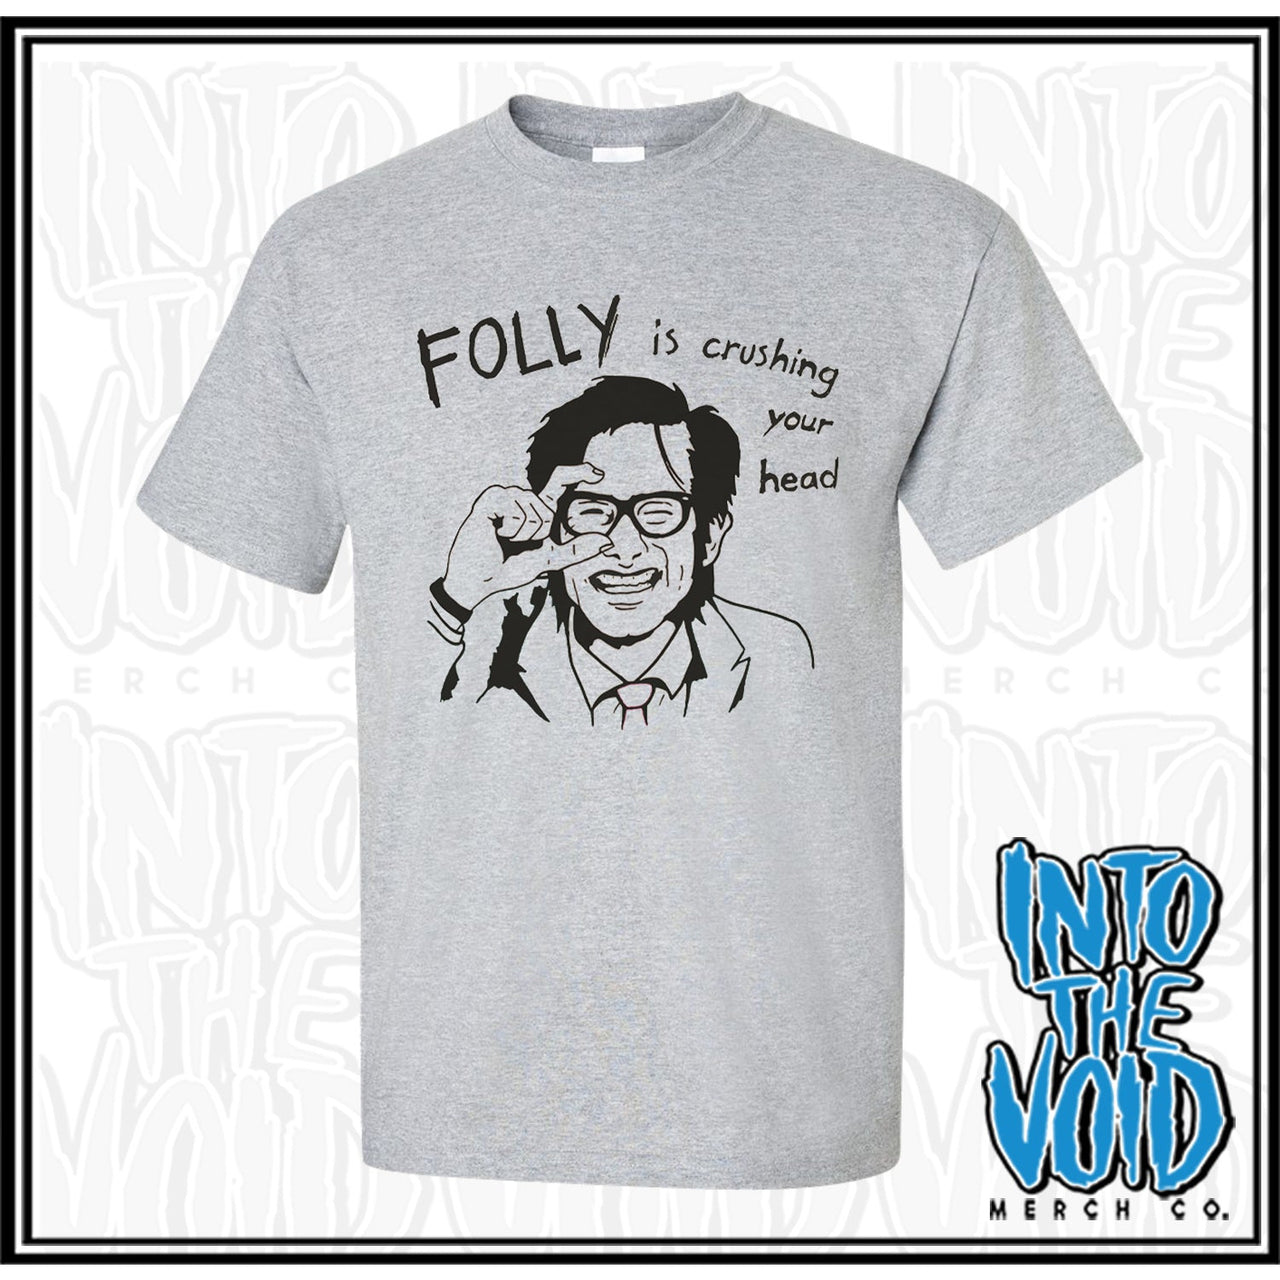 FOLLY - KIDS IN THE HALL - Short Sleeve T-Shirt - INTO THE VOID Merch Co.